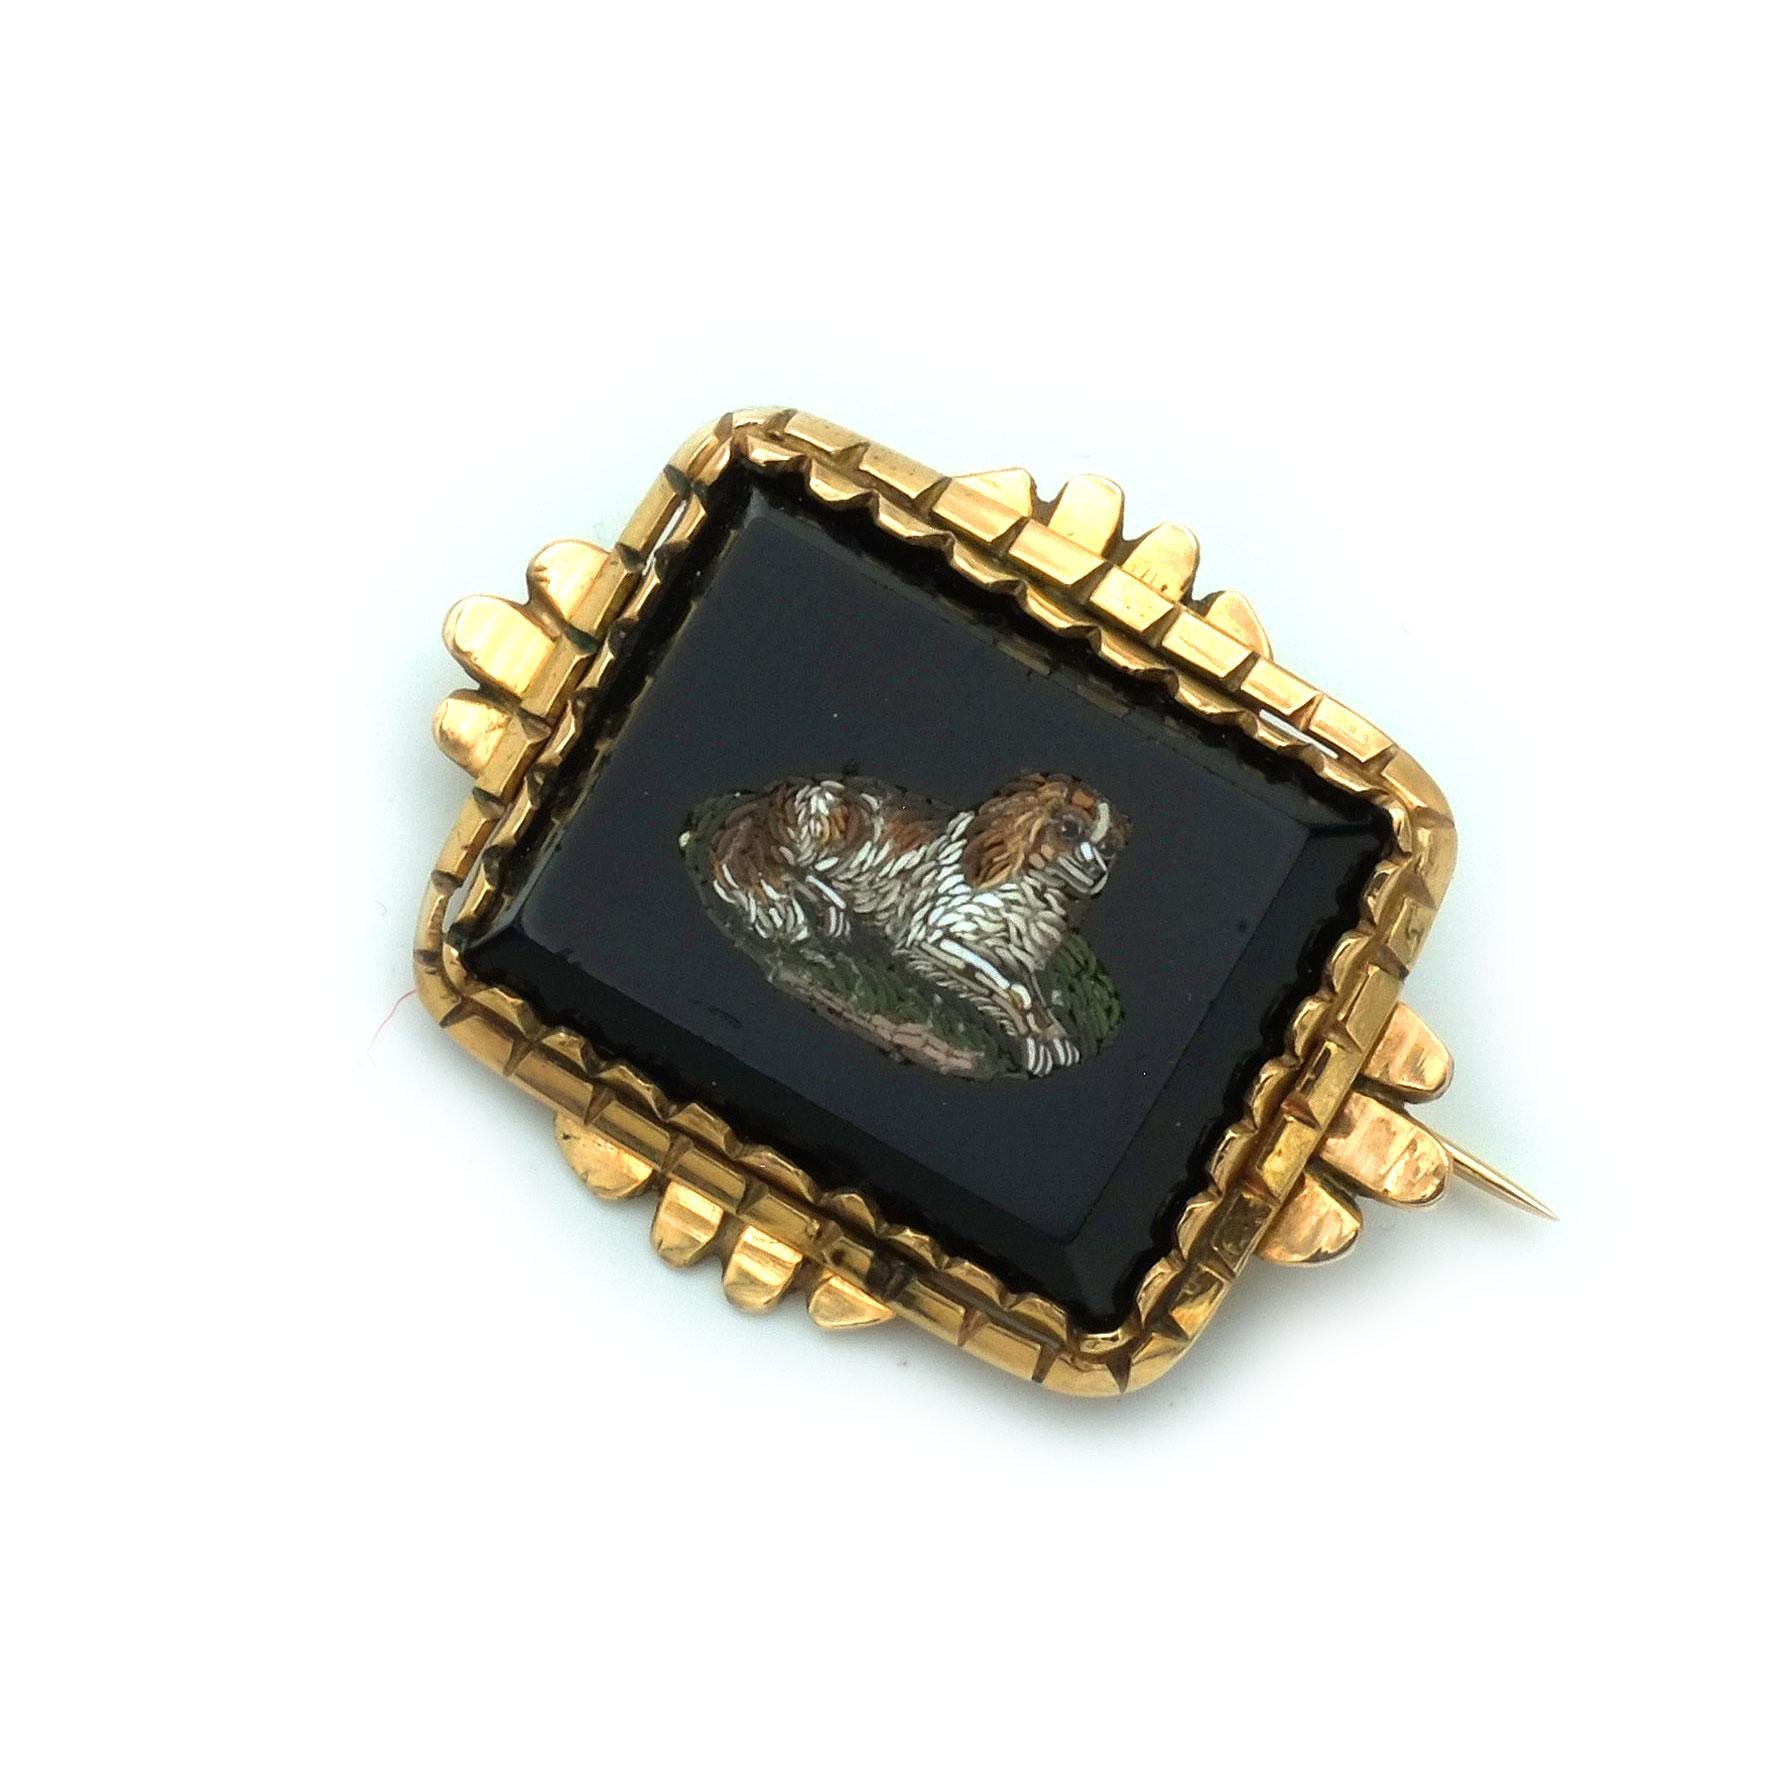 Square Cut Victorian Micromosaic 14K Gold Brooch Depicting a King Charles Spaniel c. 1870 For Sale